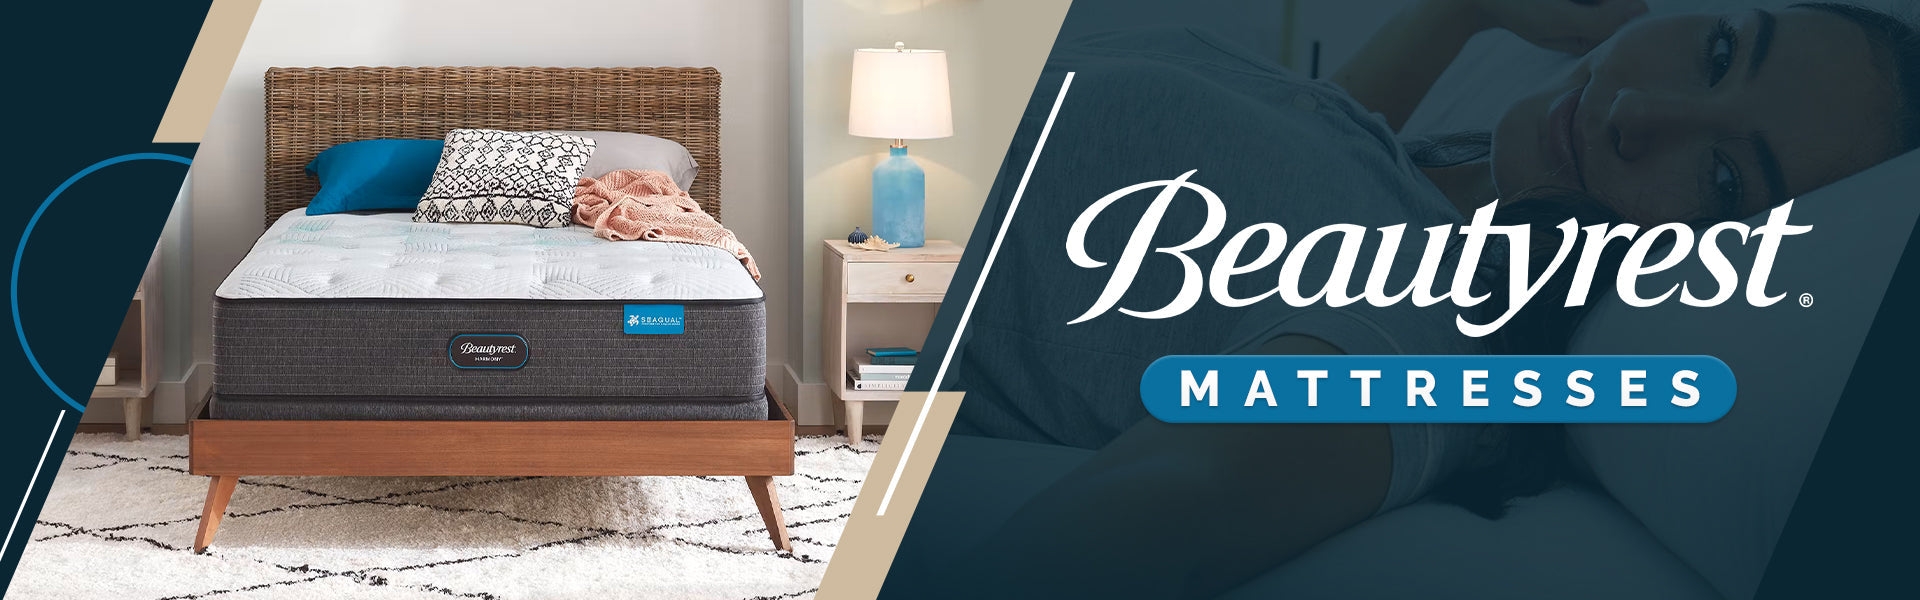 beautyrest mattress on wooden bed frame, beautyrest logo with woman laying down in the background